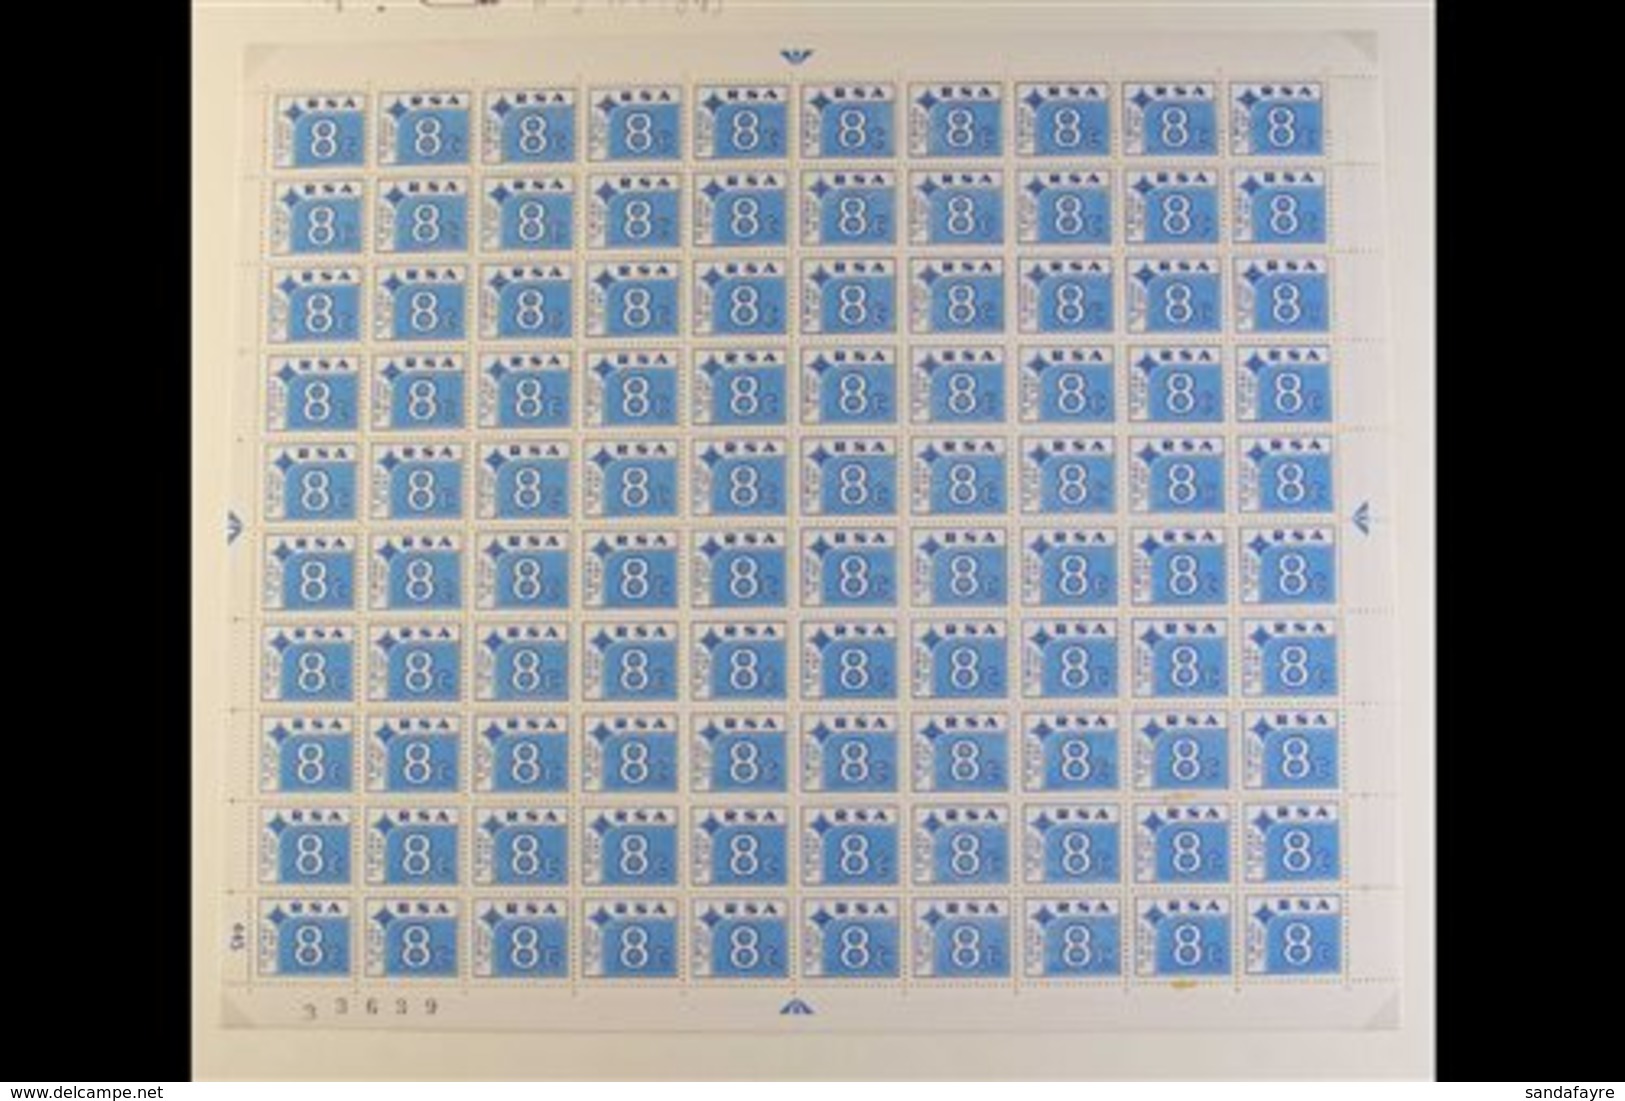 POSTAGE DUES 1972 Set Of 6 Values In COMPLETE SHEETS OF 100, Includes 1c & 2c In Both A & B Panes, SG D75/80, Never Hing - Ohne Zuordnung